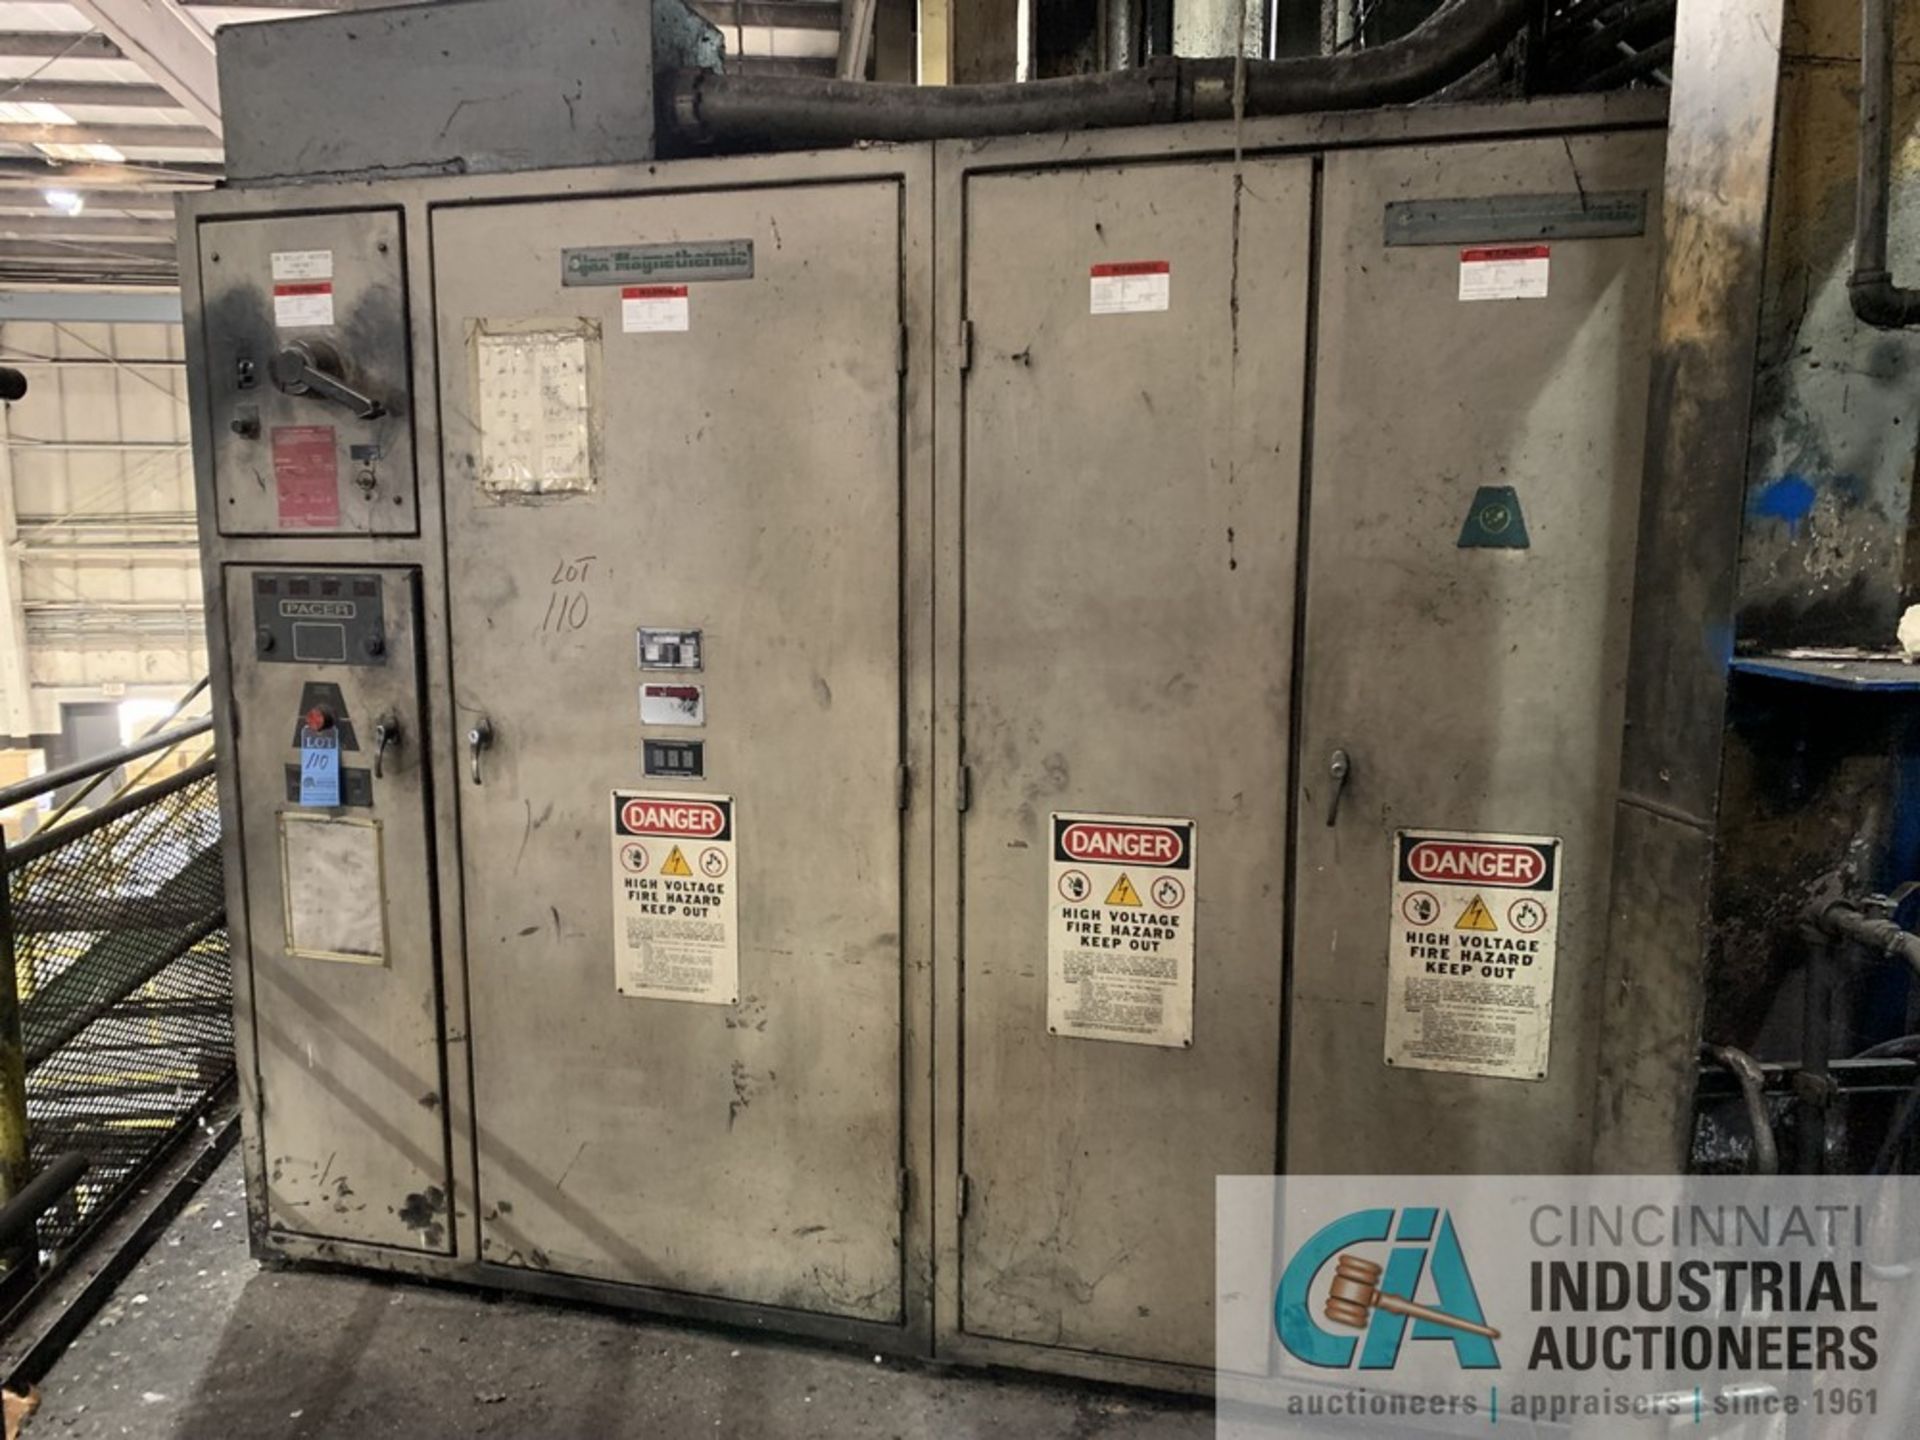 750 KW AJAX MAGNETHERMIC PACER II INDUCTION HEAT POWER SUPPLY; S/N H2K560B, 1,250 VOLT, 12,875 KVA